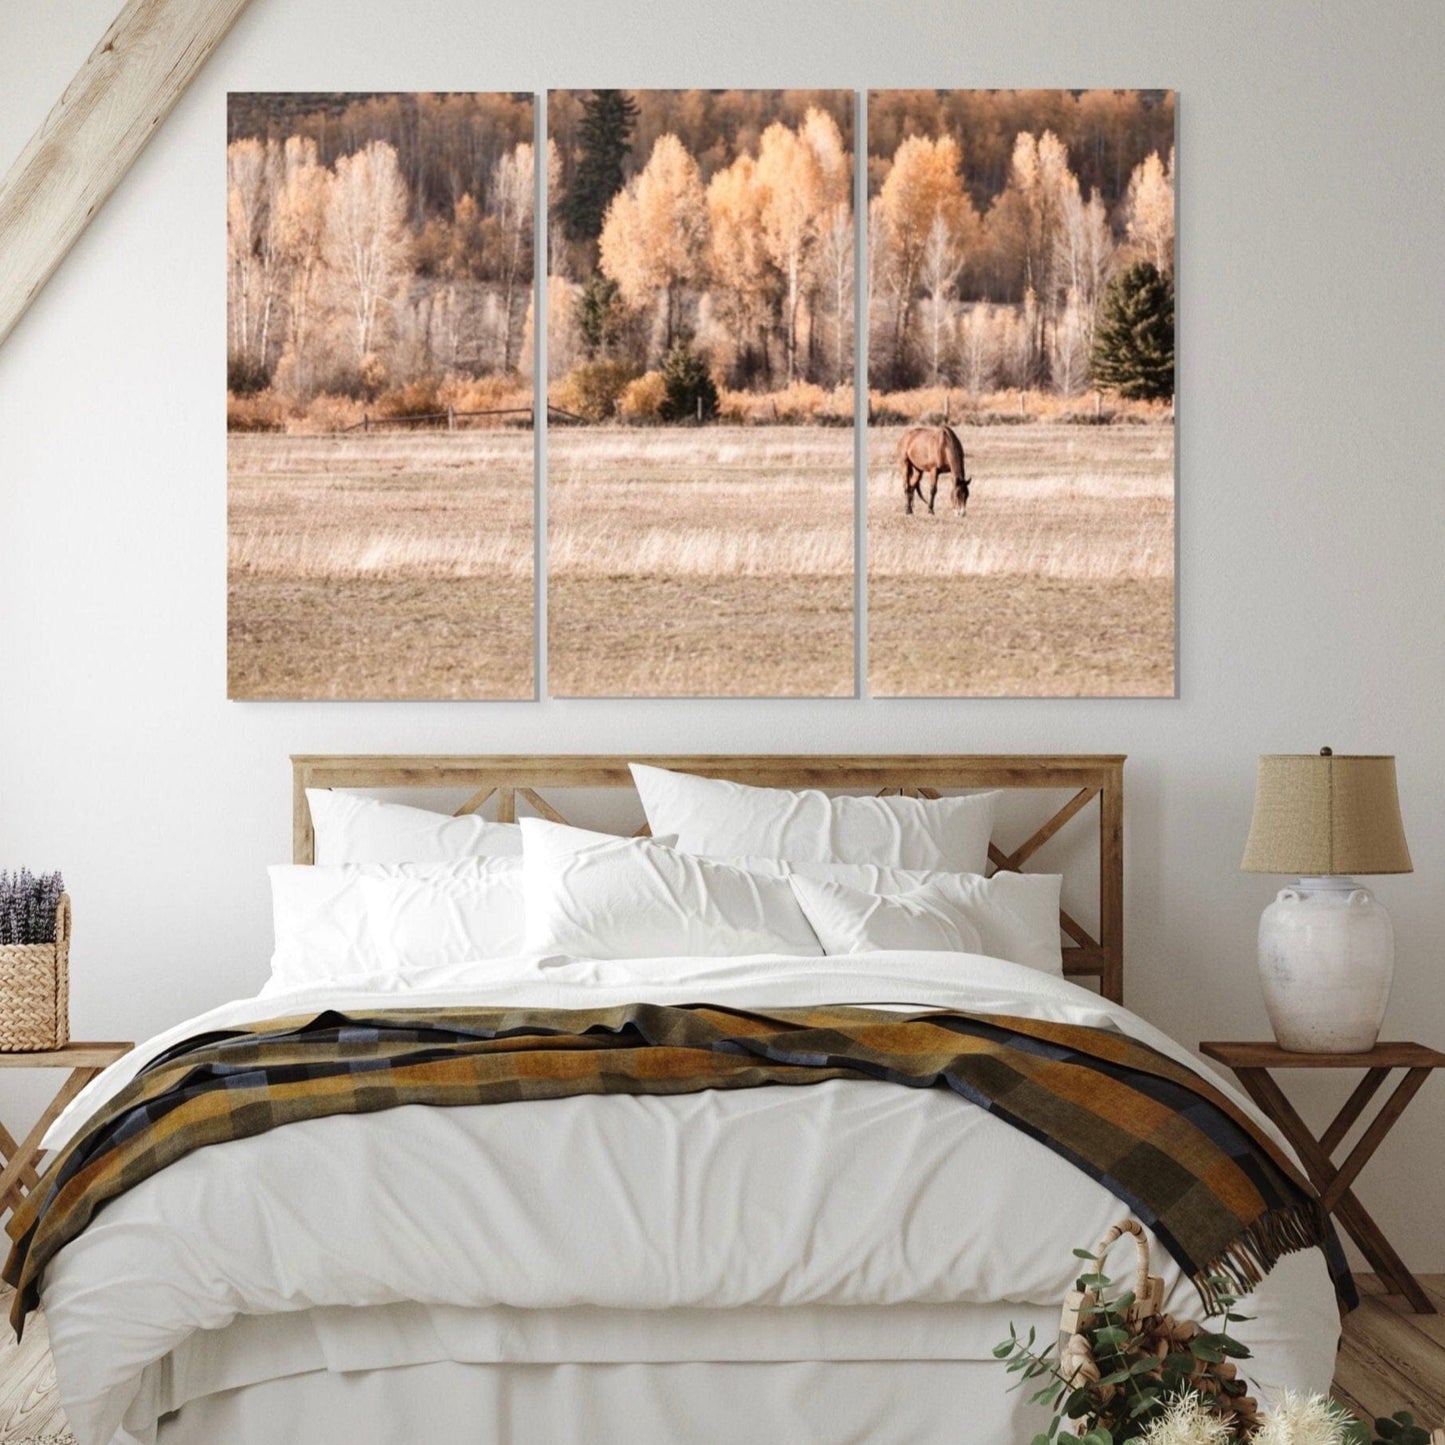 Teri James Photography Wall Art Horse Art for Large Wall - 3 Piece Canvas Triptych